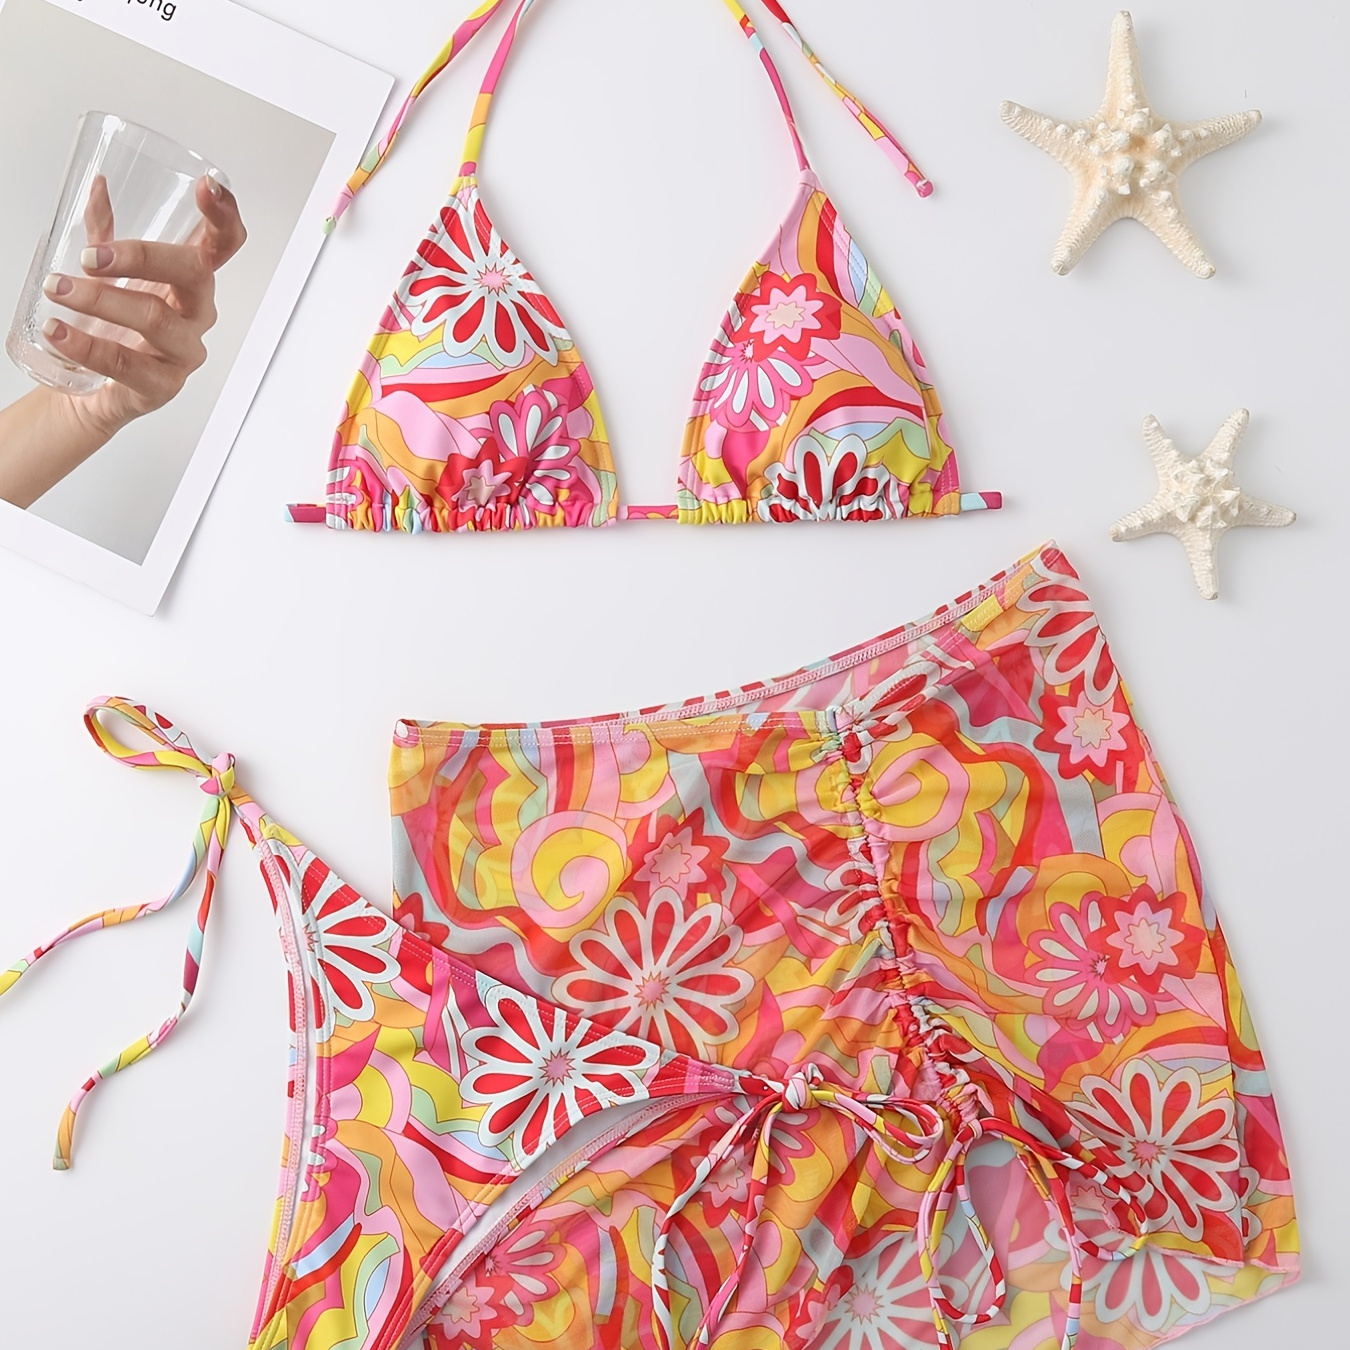 

3-pieces Floral Print Bikini Sets, V Neck Halter Neck Tie Back Tie Side High Cut Cover Up Skirt Bathing Suit, Women's Swimwear & Clothing